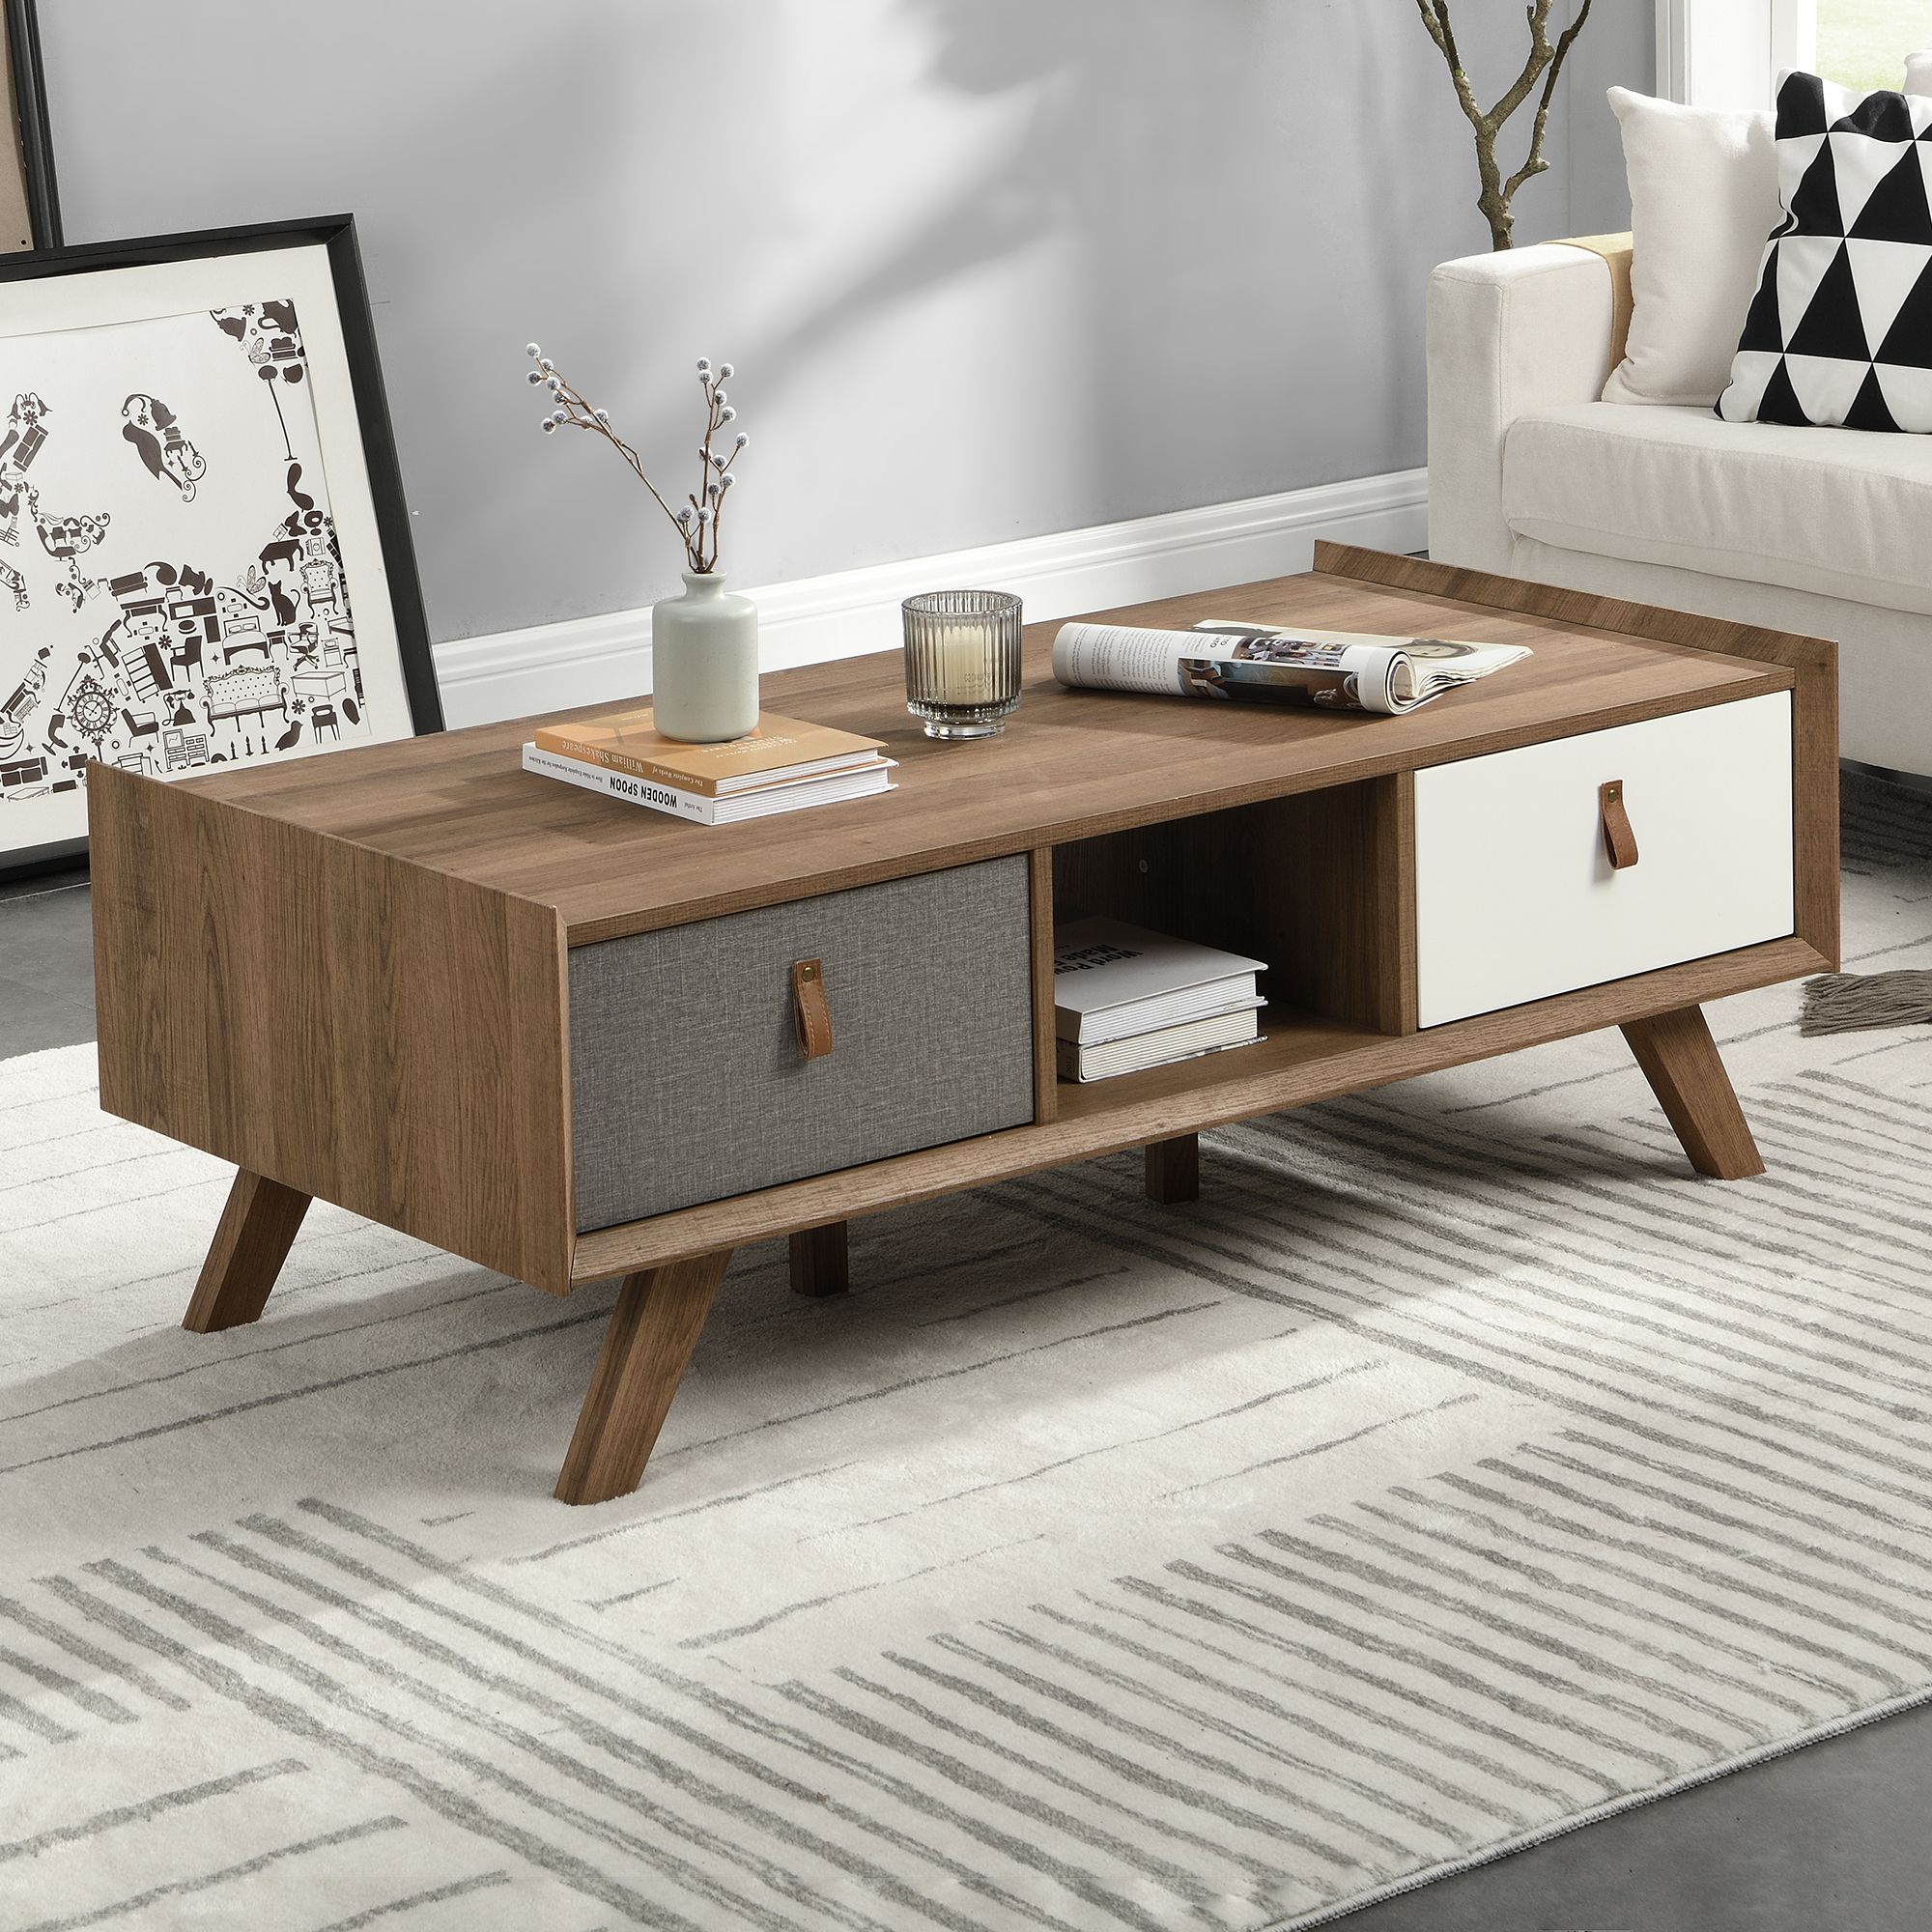 Core Living Diana 2 Drawer Coffee Table | Temple & Webster Inside 2 Drawer Coffee Tables (View 7 of 20)